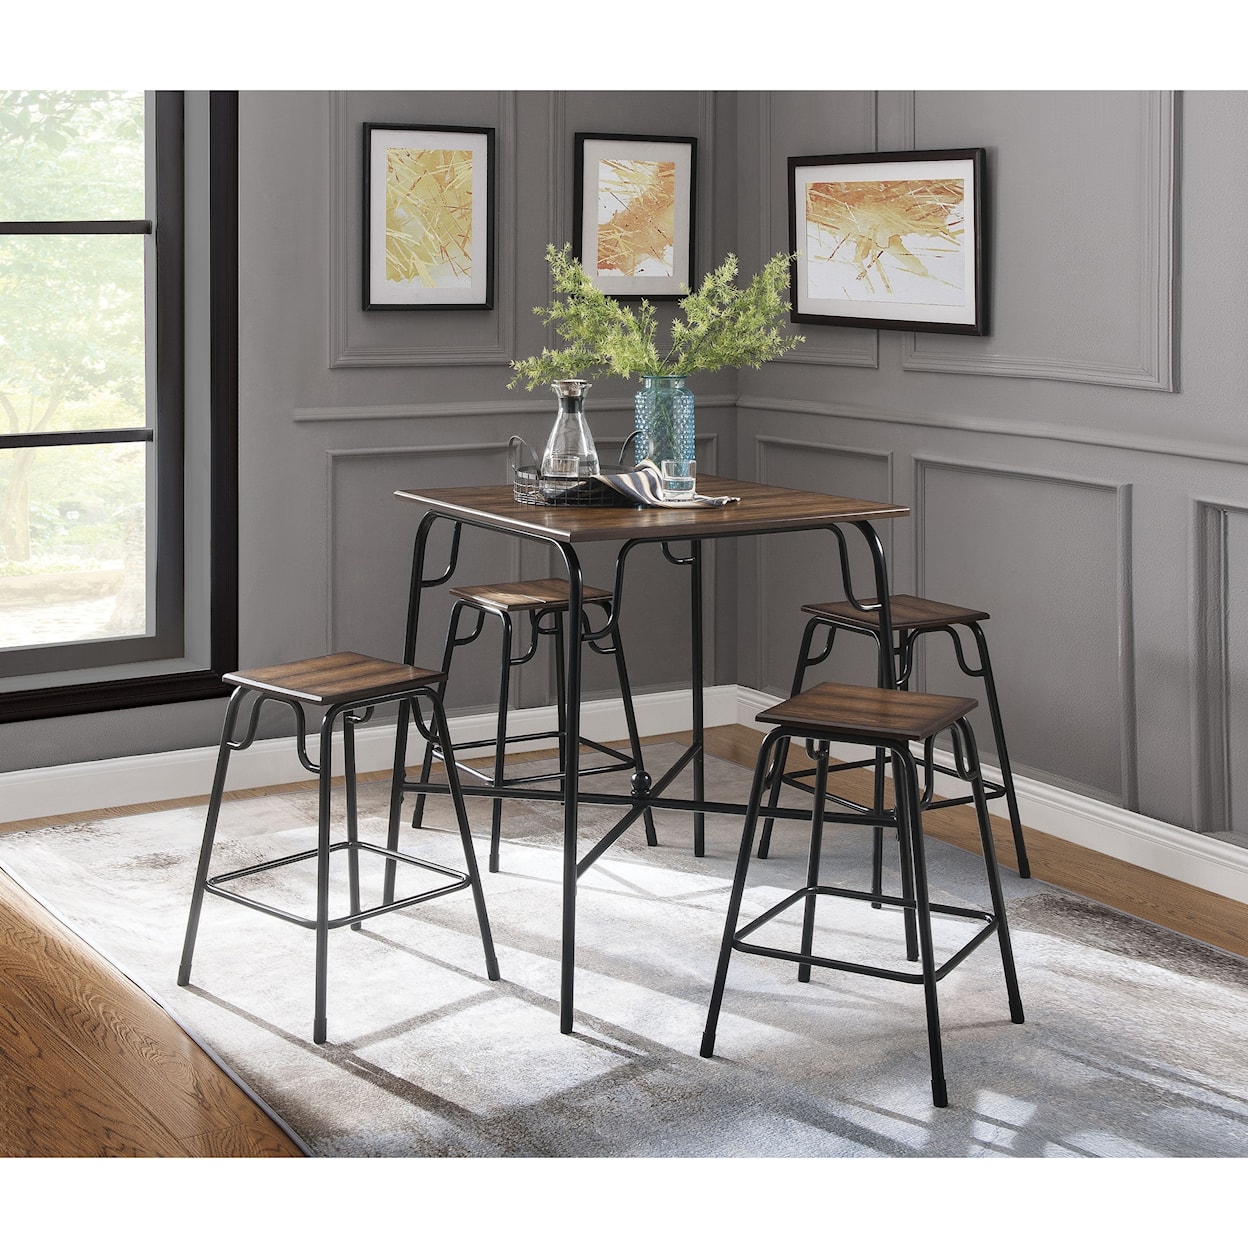 Acme Furniture Hachi Counter Height Dining Set with 4 Chairs